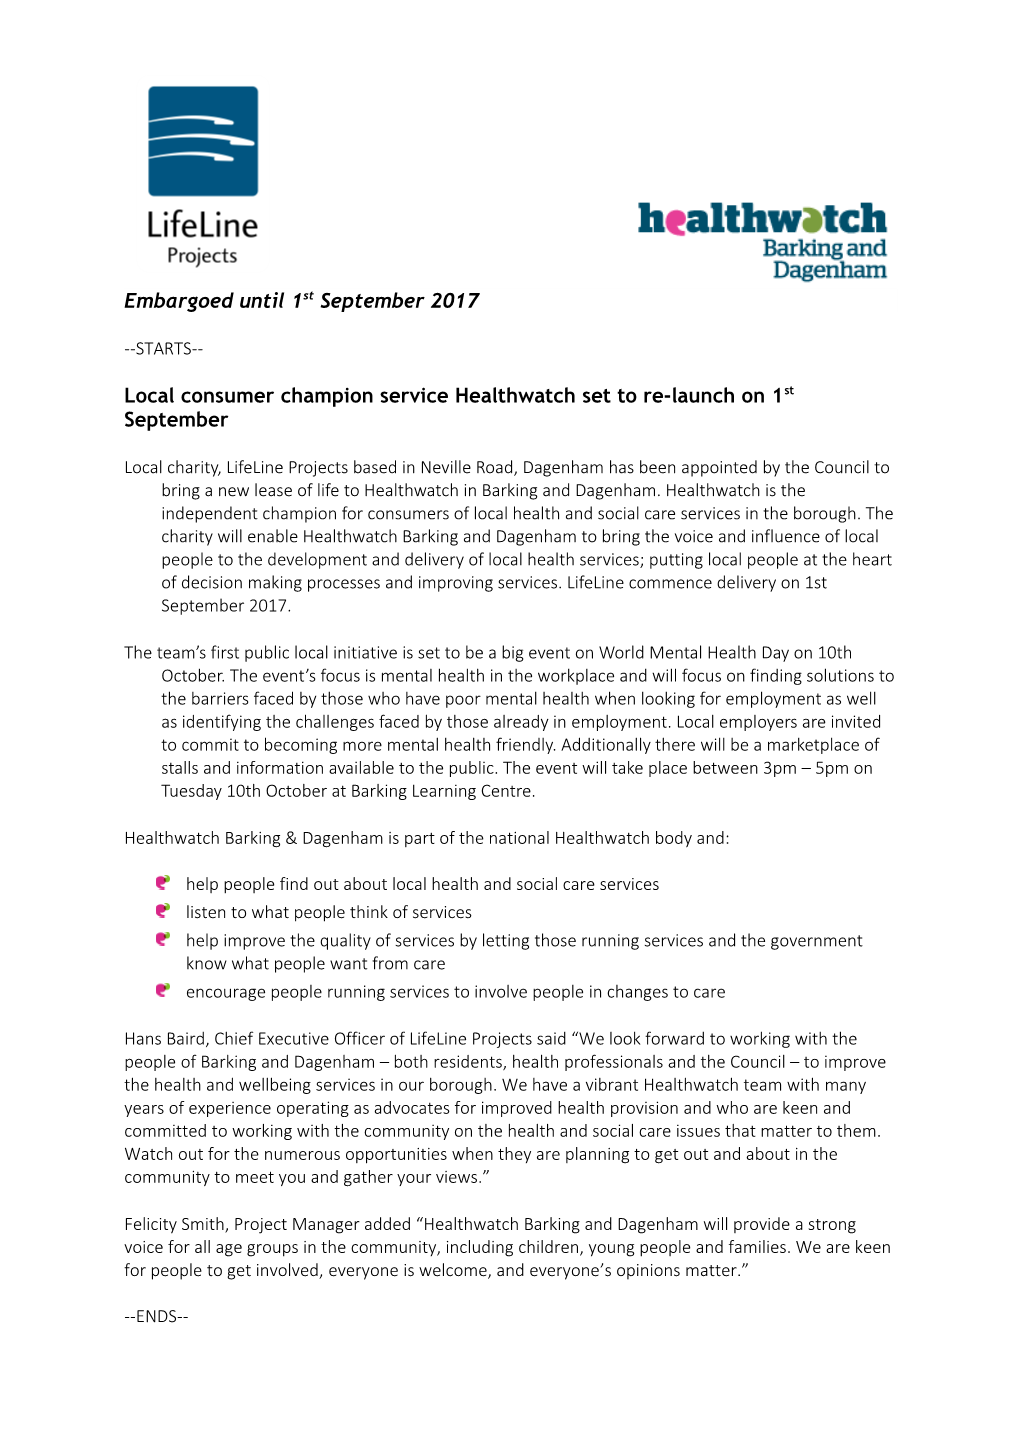 Local Consumer Champion Service Healthwatch Set to Re-Launch on 1St September